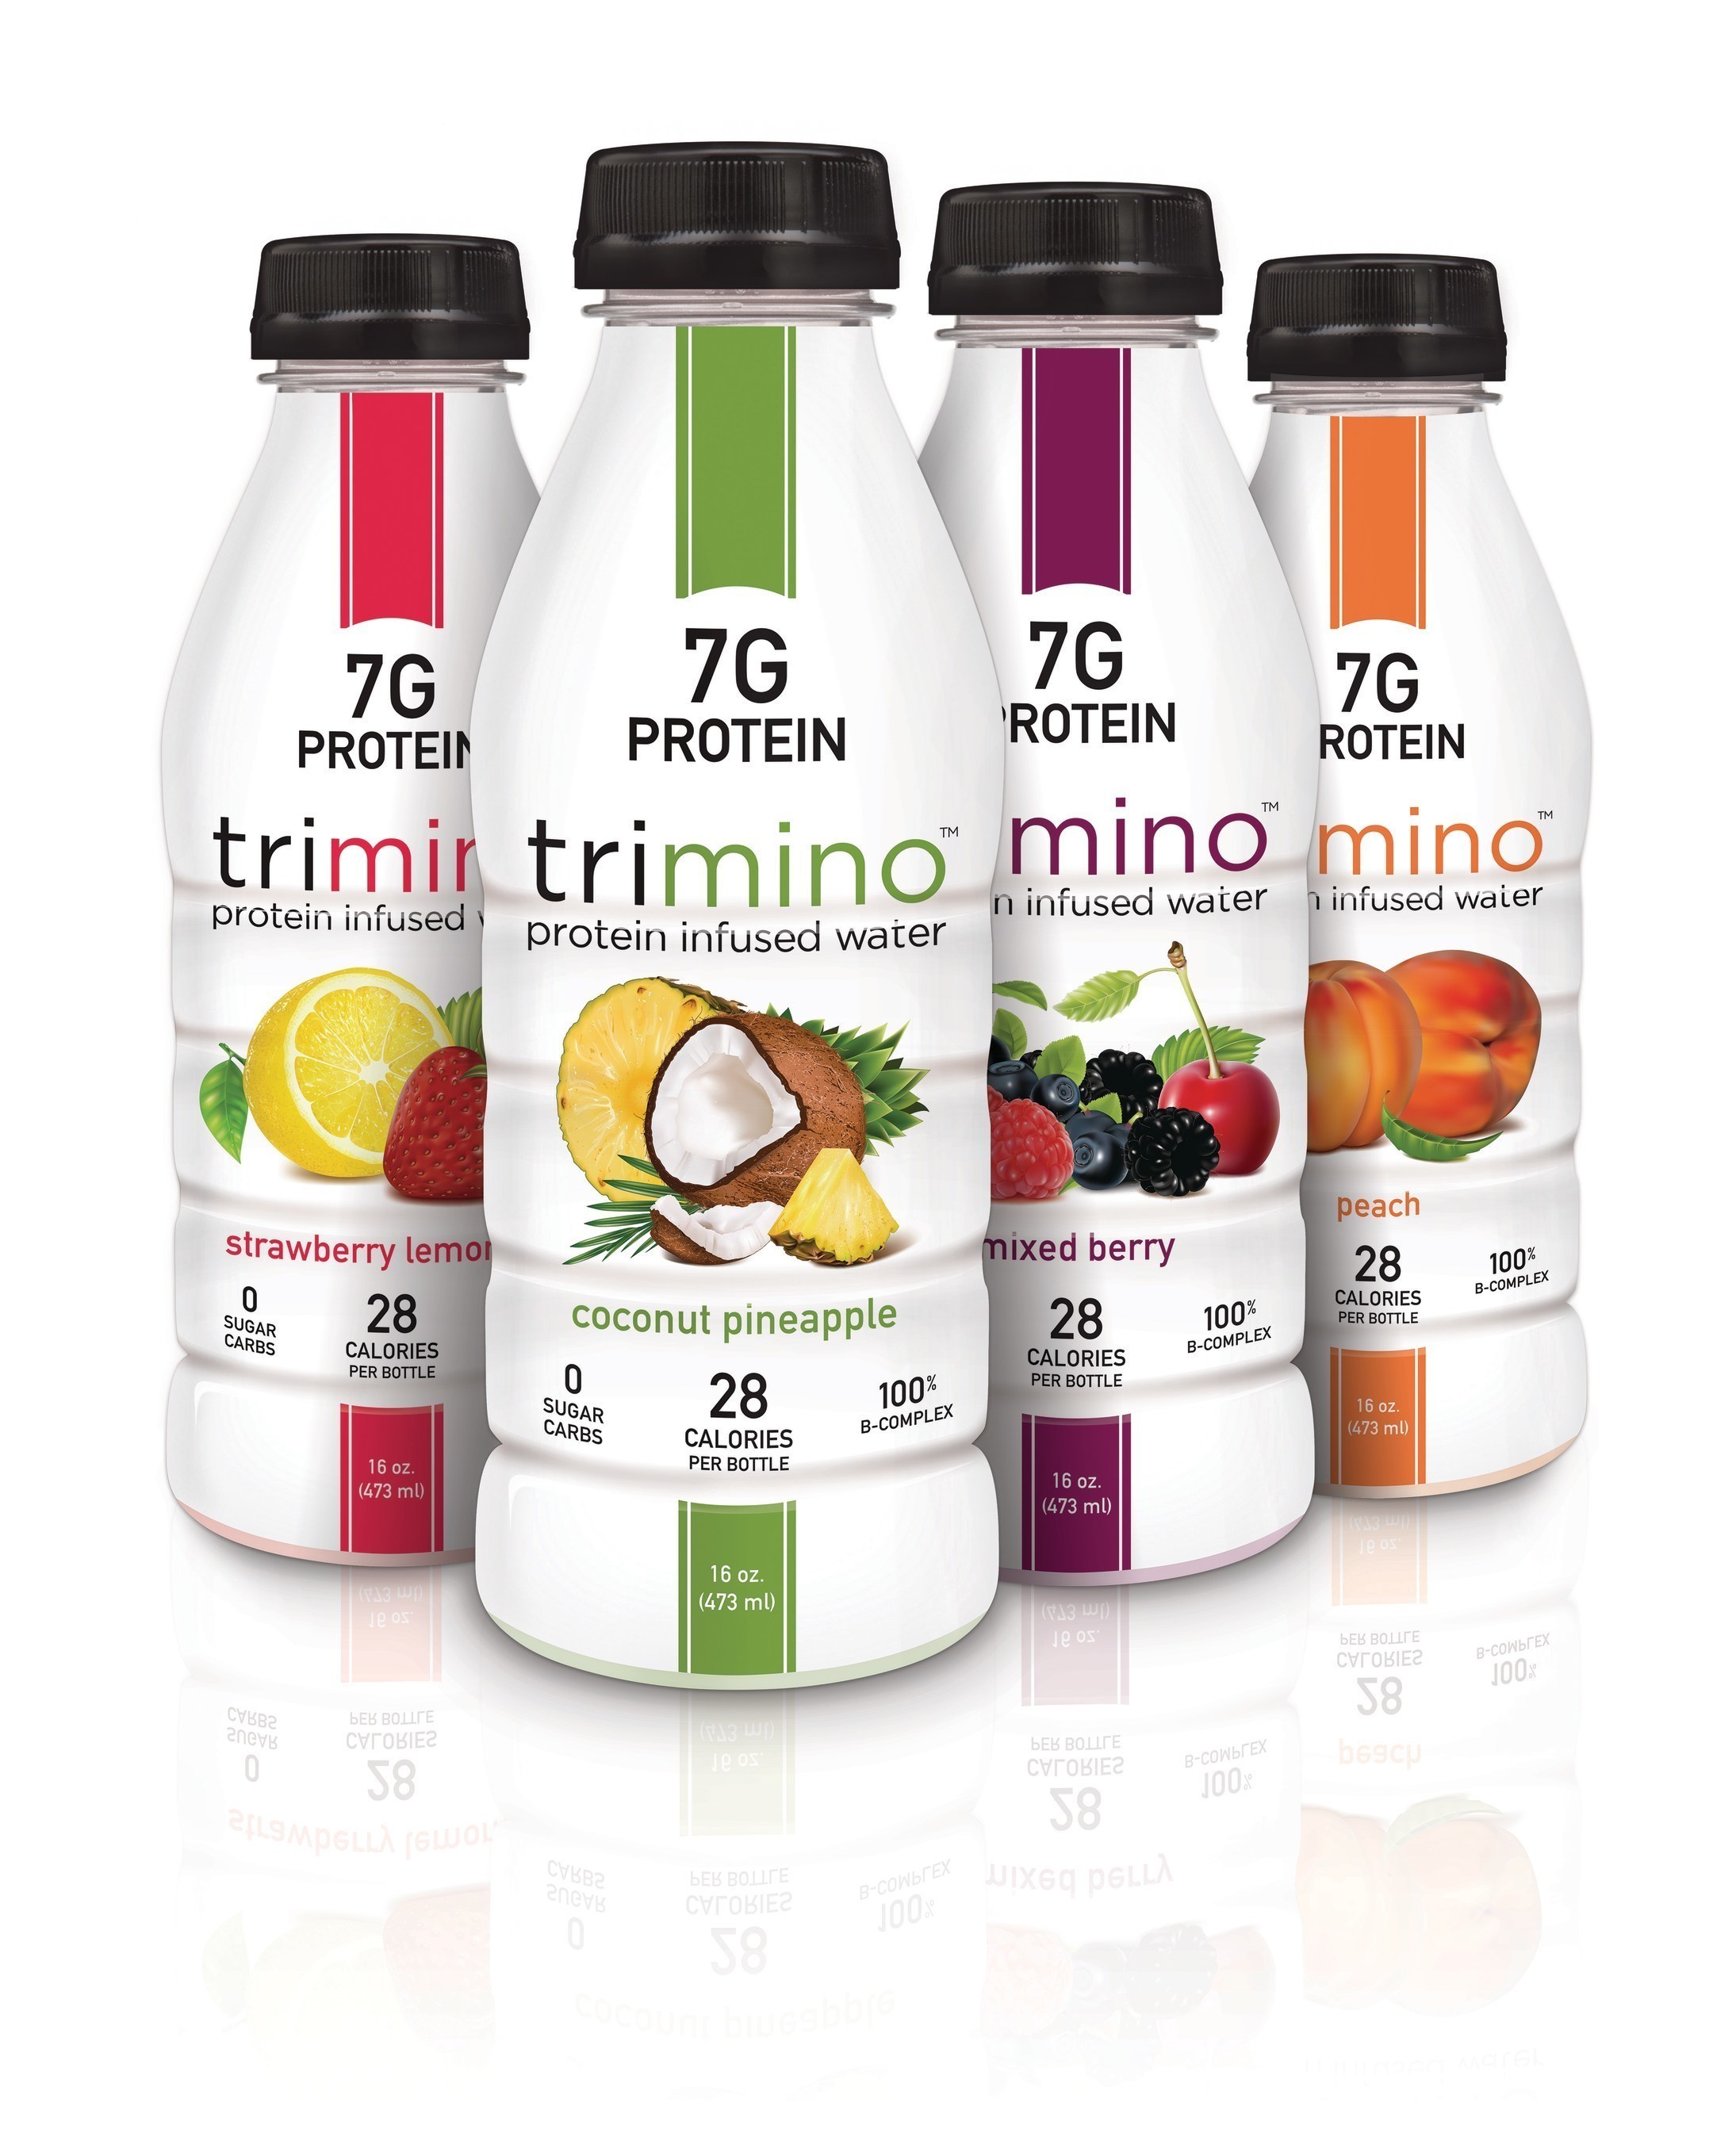 trimino protein-infused water "Beats Water, Everyday" with 7gs of whey protein, B-complex vitamins, 0 sugar, 0 carbs and only 28 calories. trimino is available in 4 flavors and simply delicious.